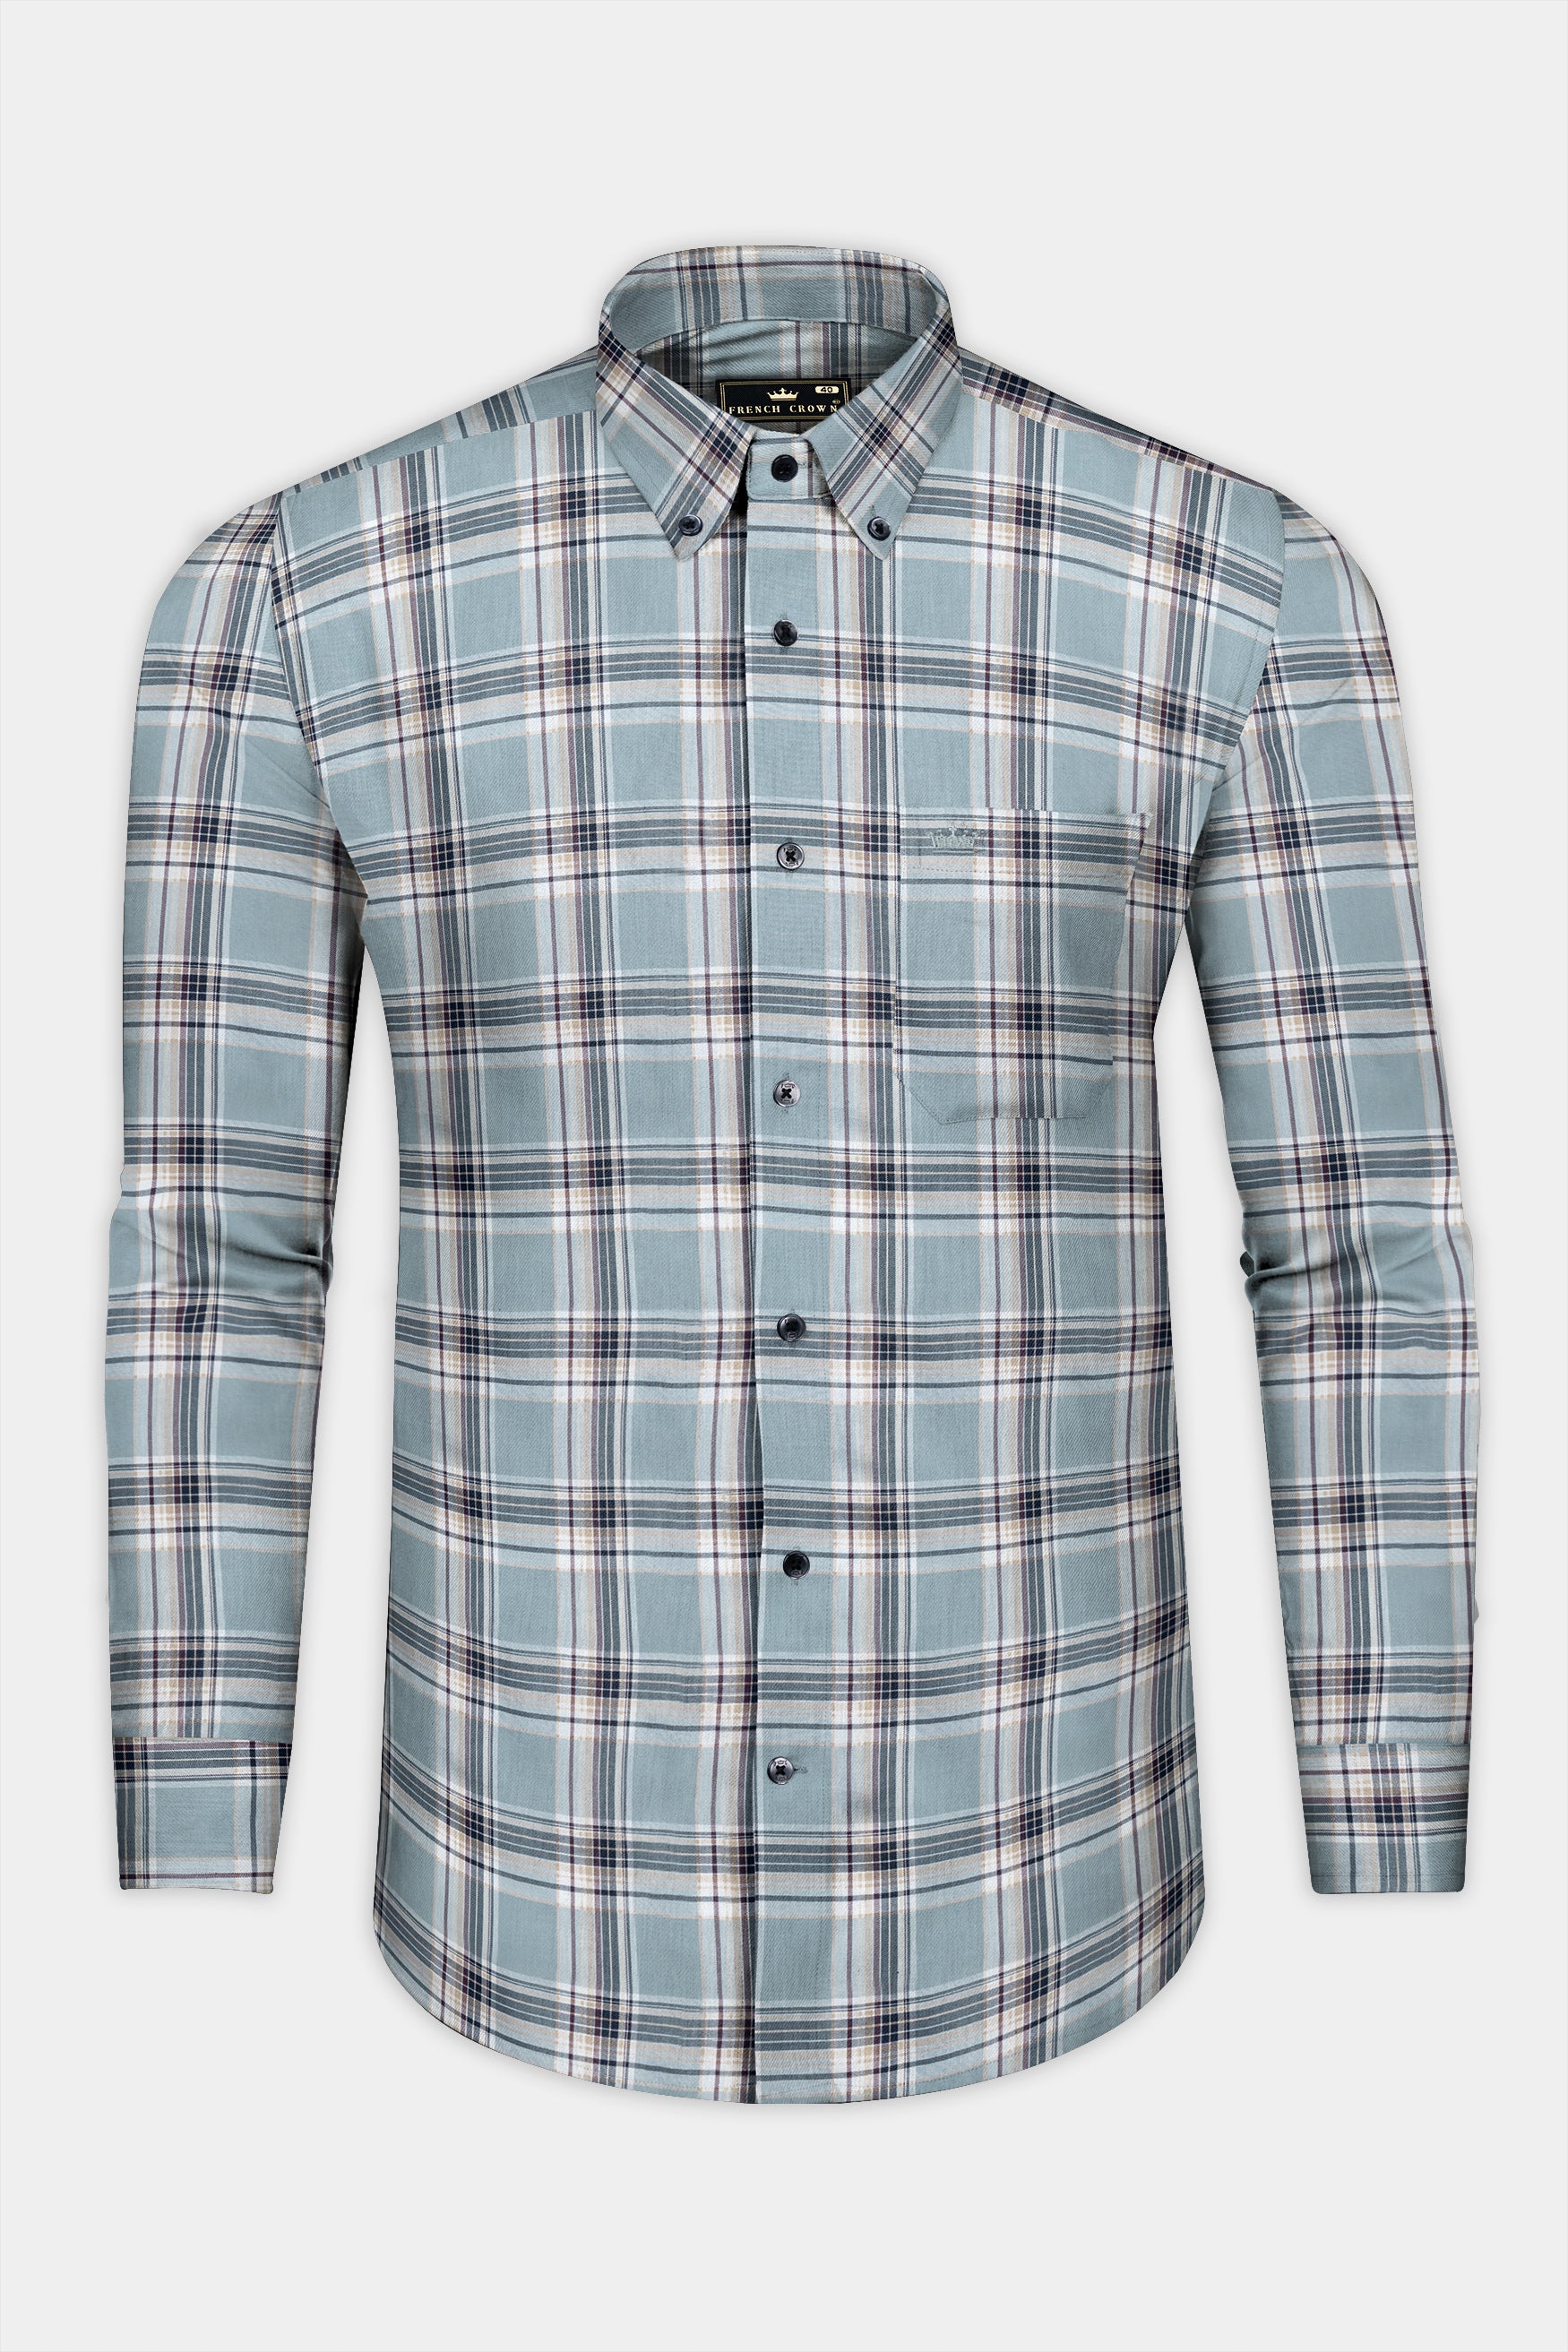 French Blue And Spring Cream Checked Twill Premium Cotton Shirt